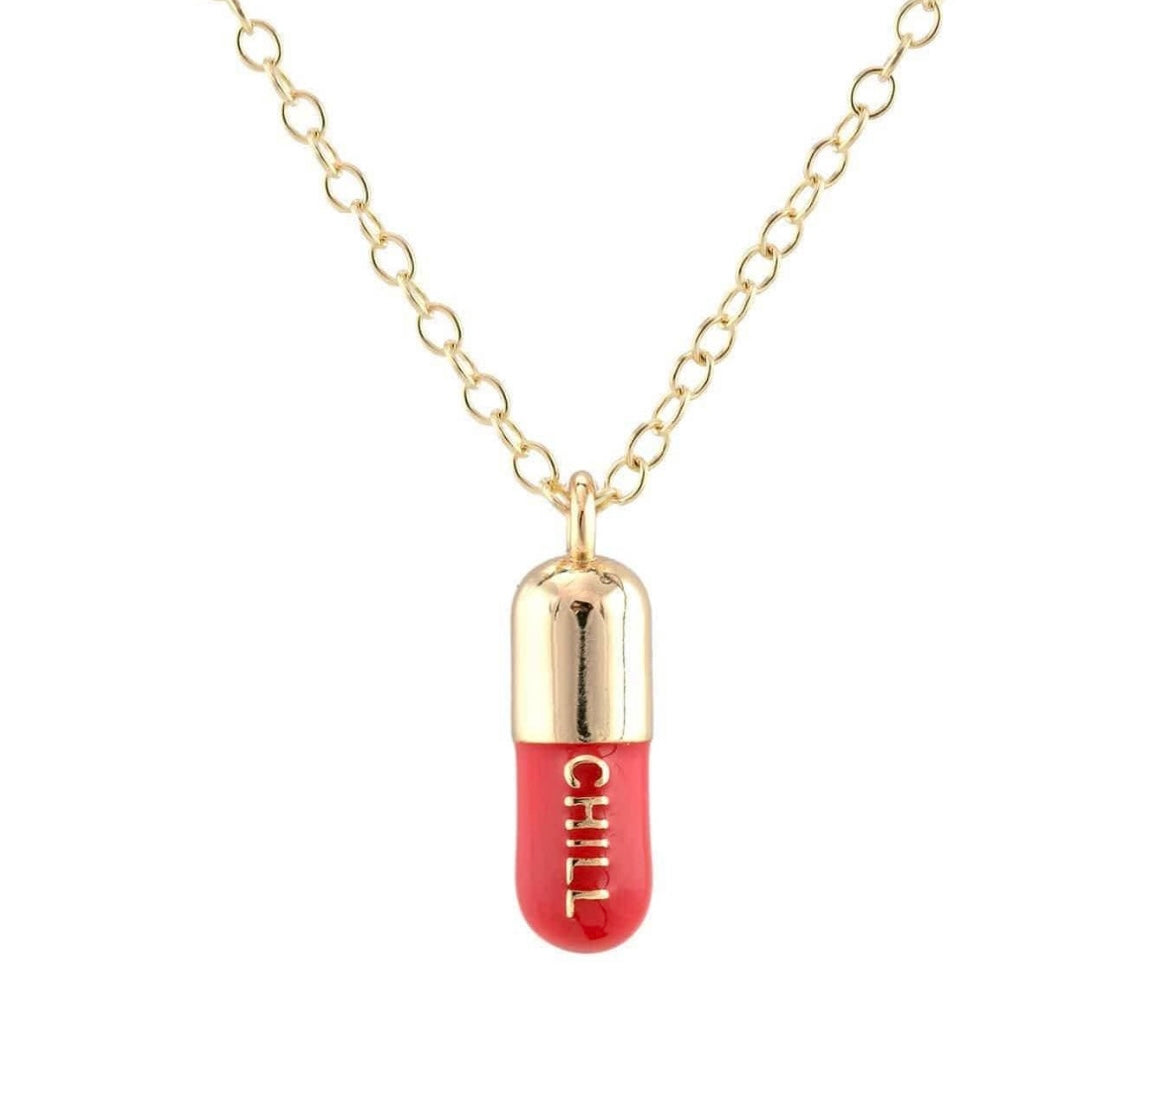 Chill Pill Enamel Necklace by Kris Nations